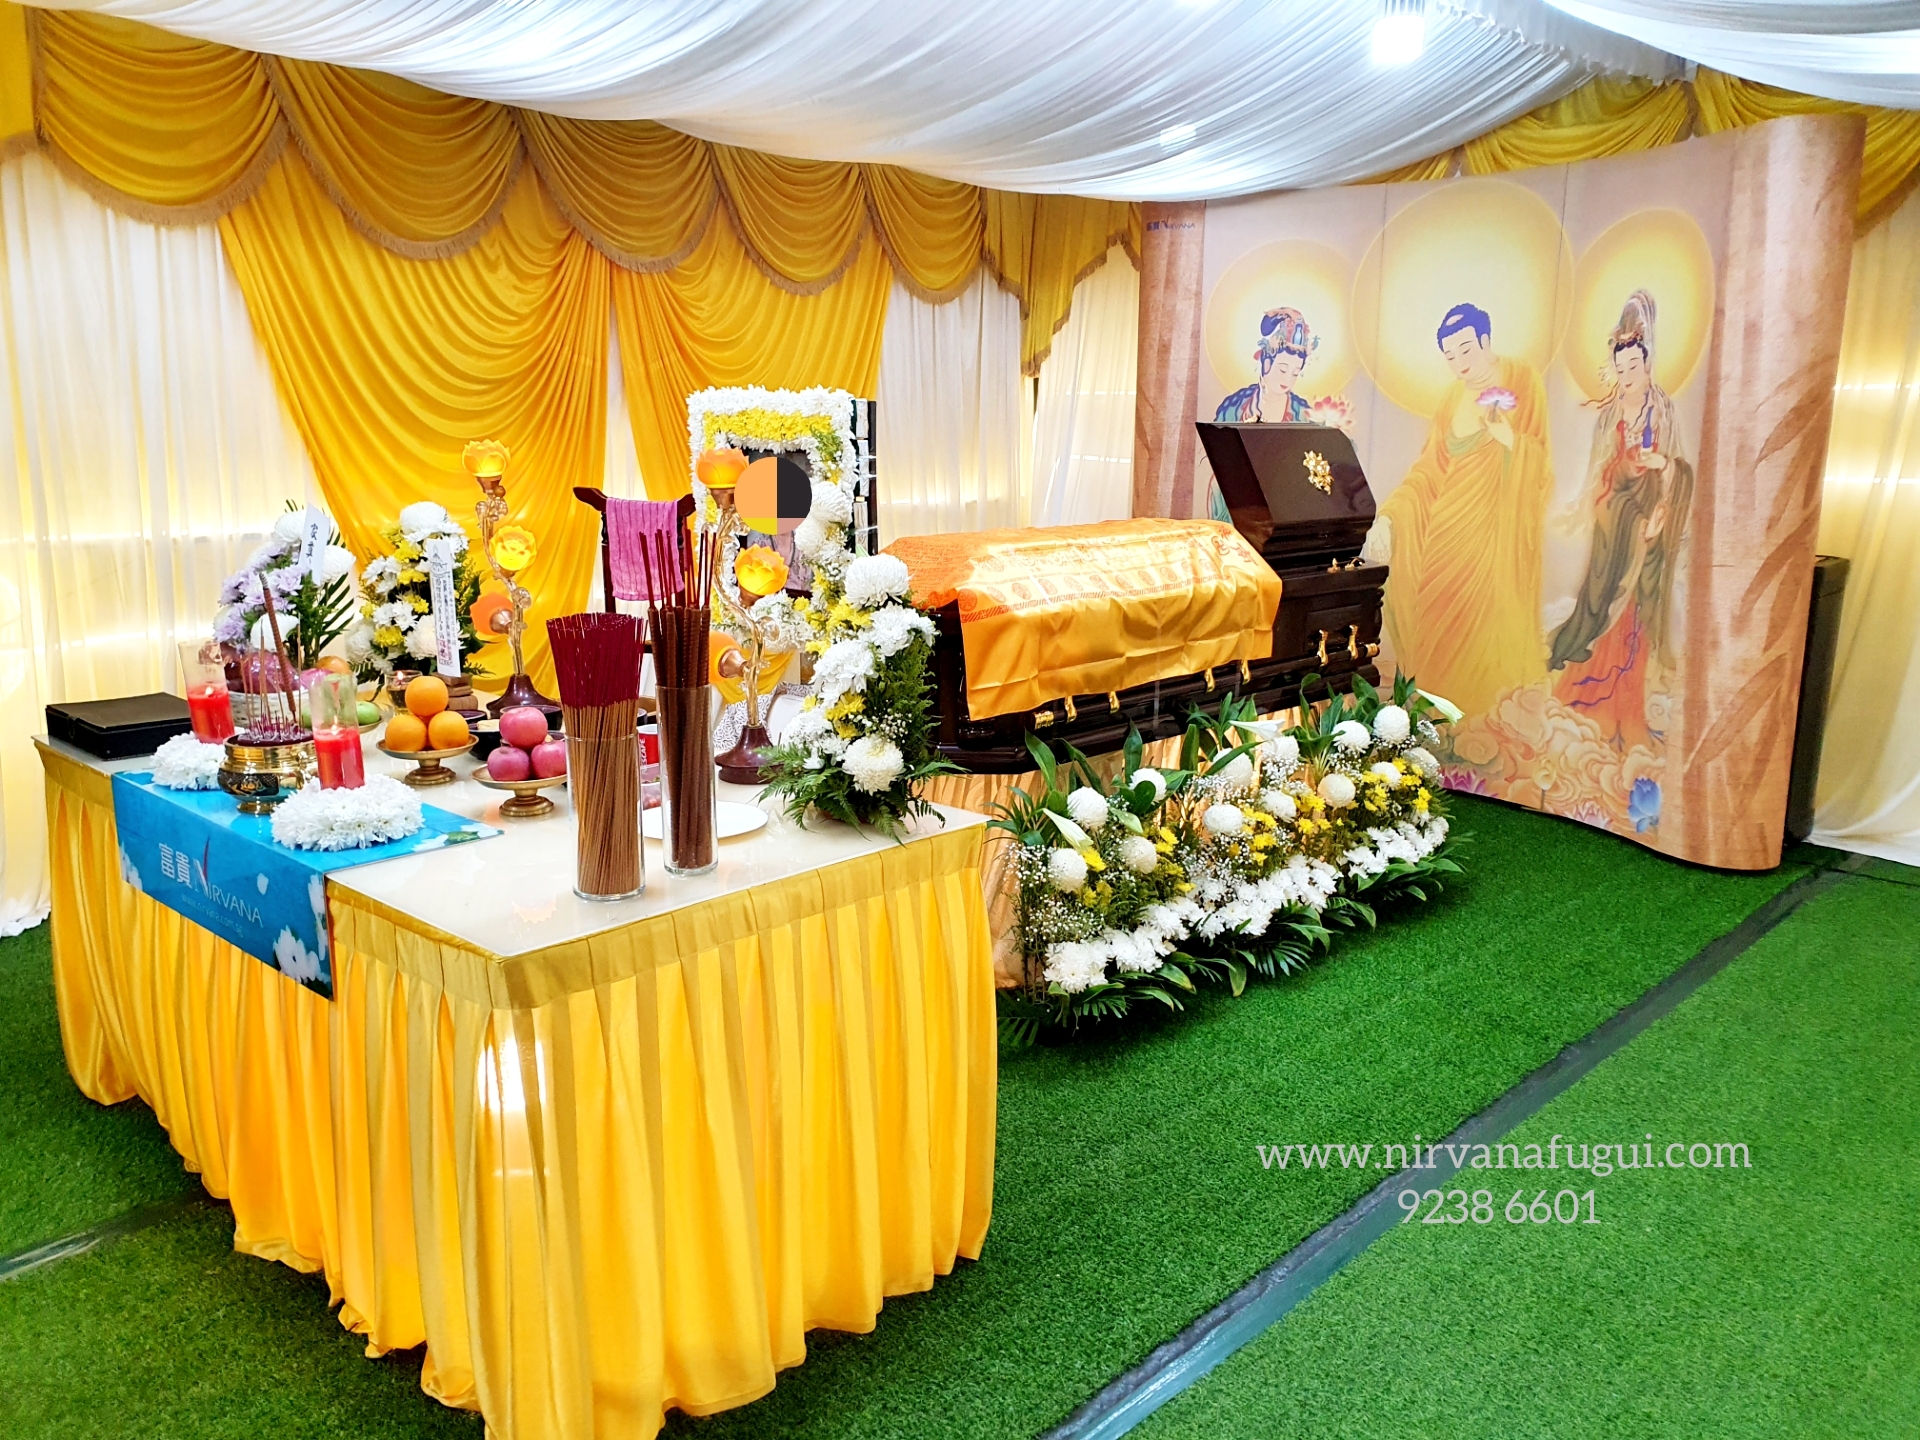 A quality Buddhist funeral wake in Singapore organised by Nirvana Singapore